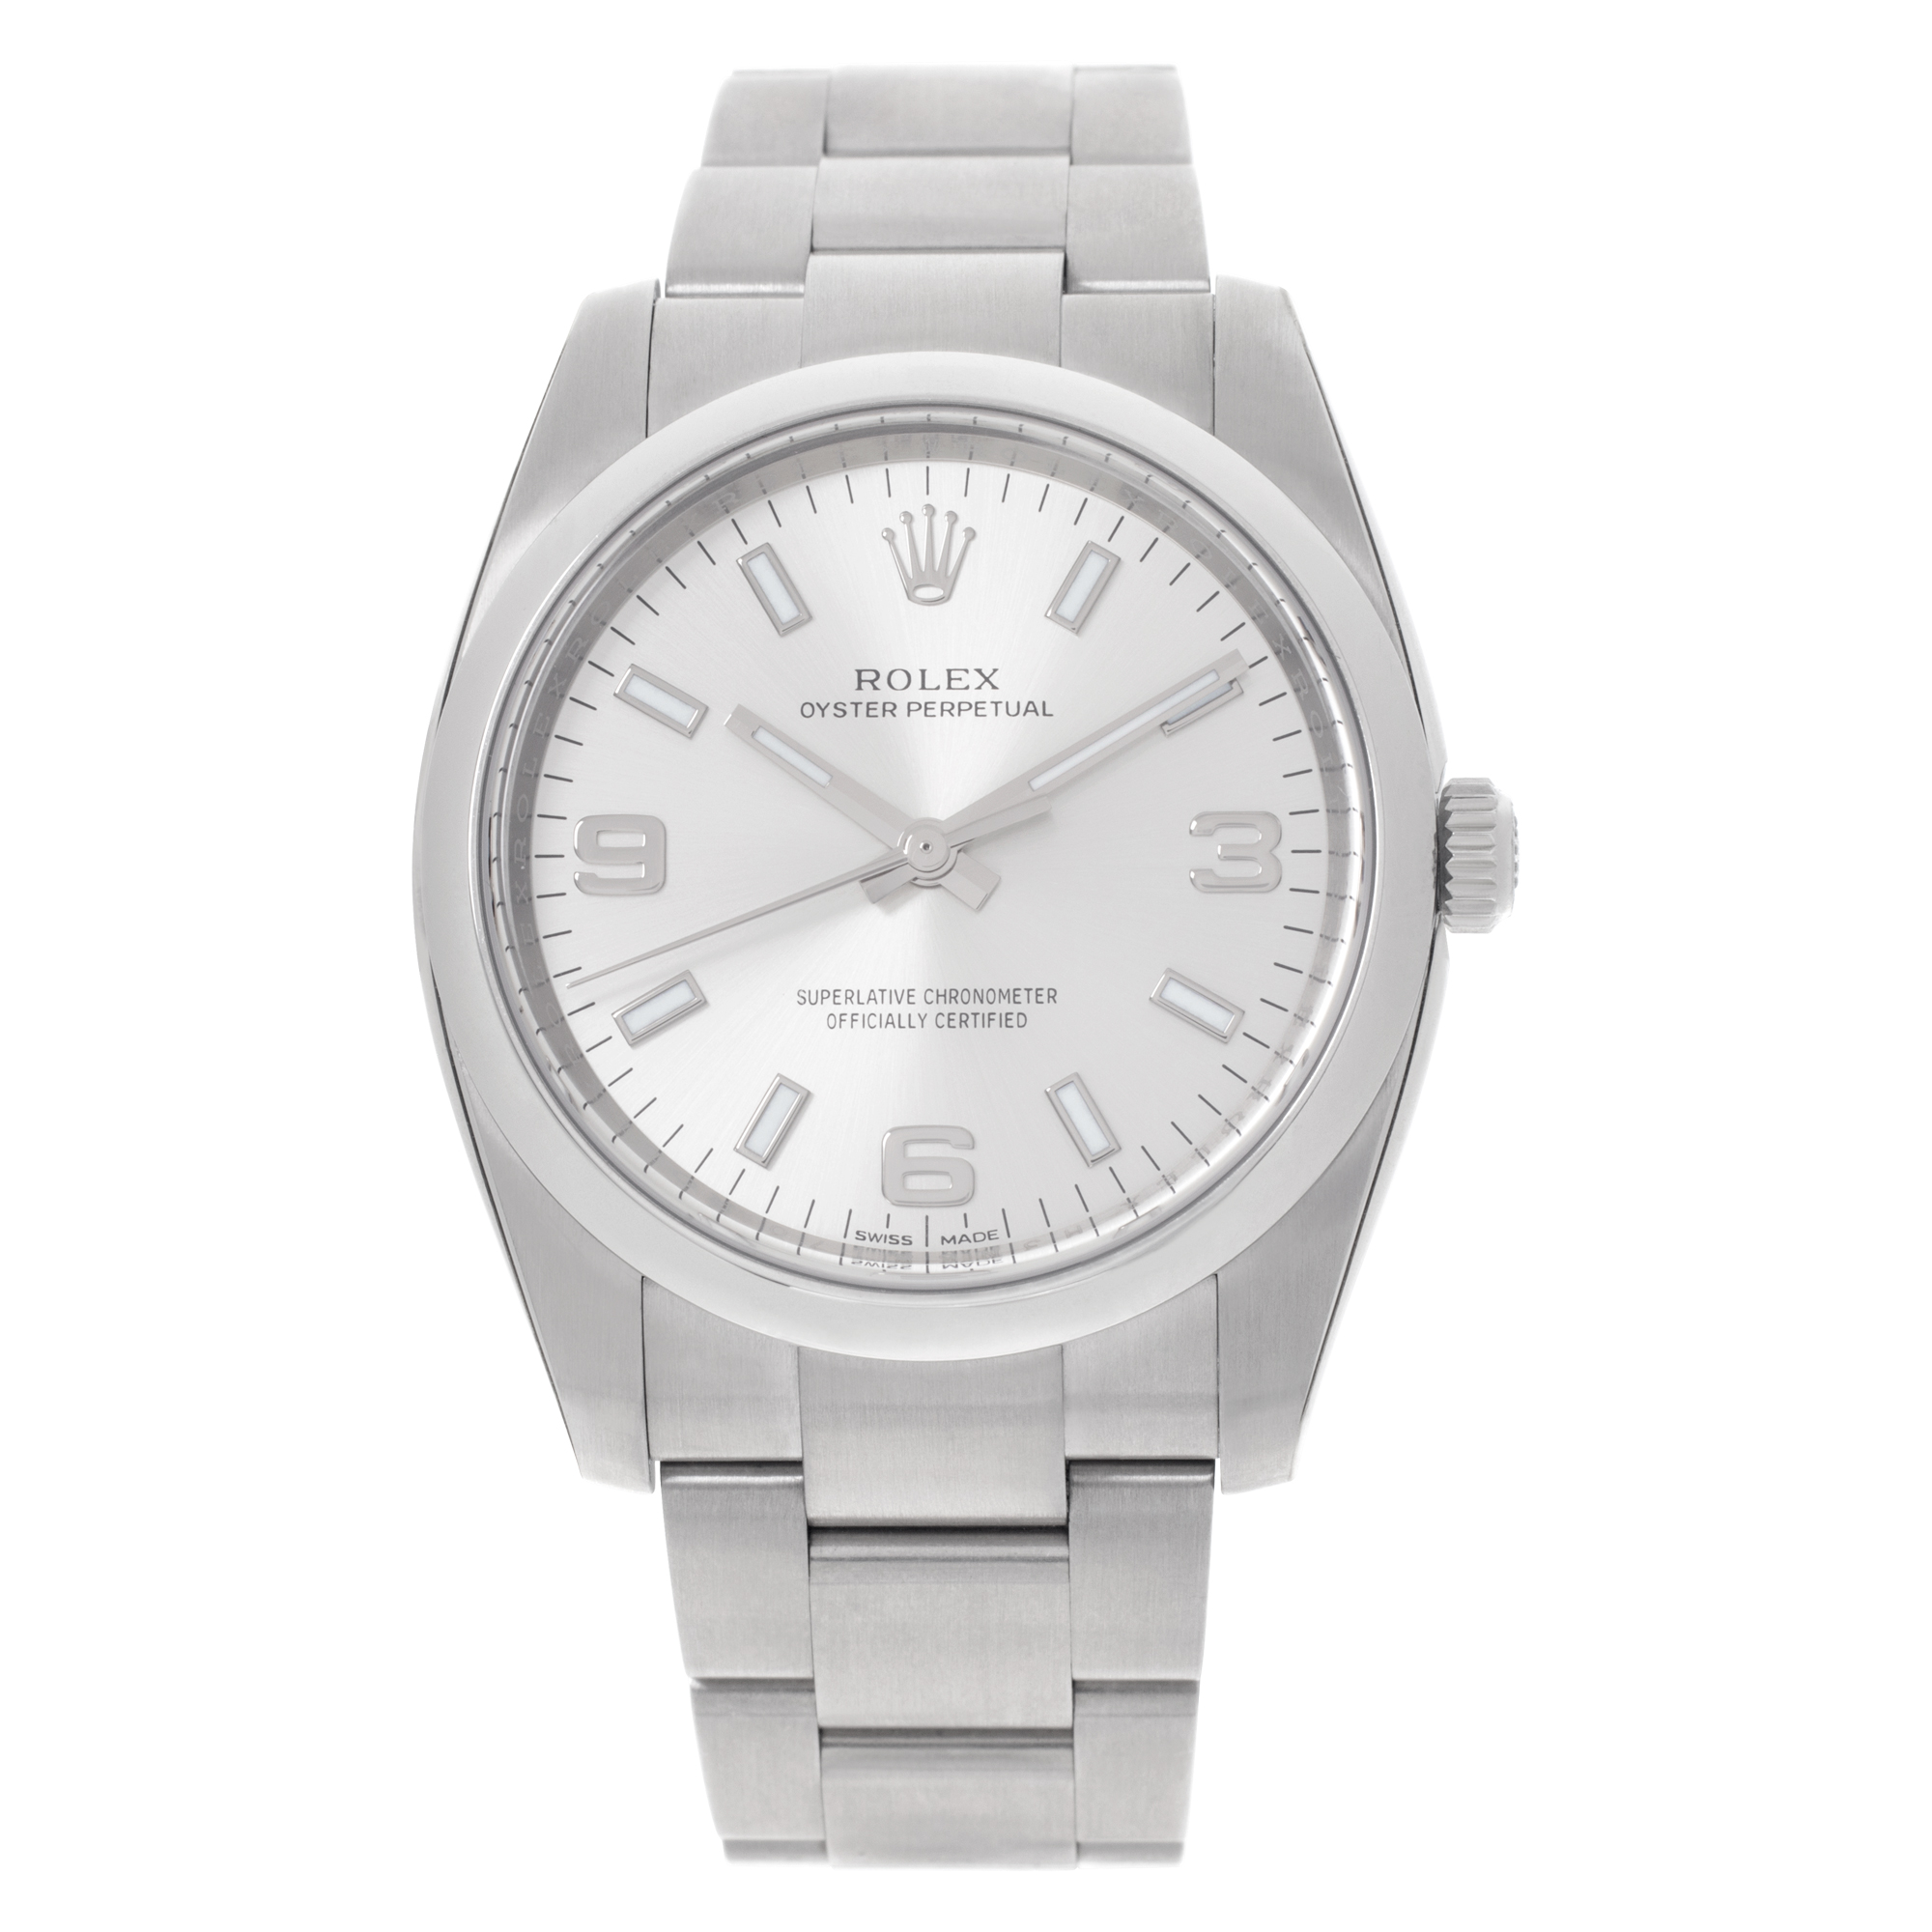 Unused Rolex Oyster Perpetual 32mm 114200 image 1